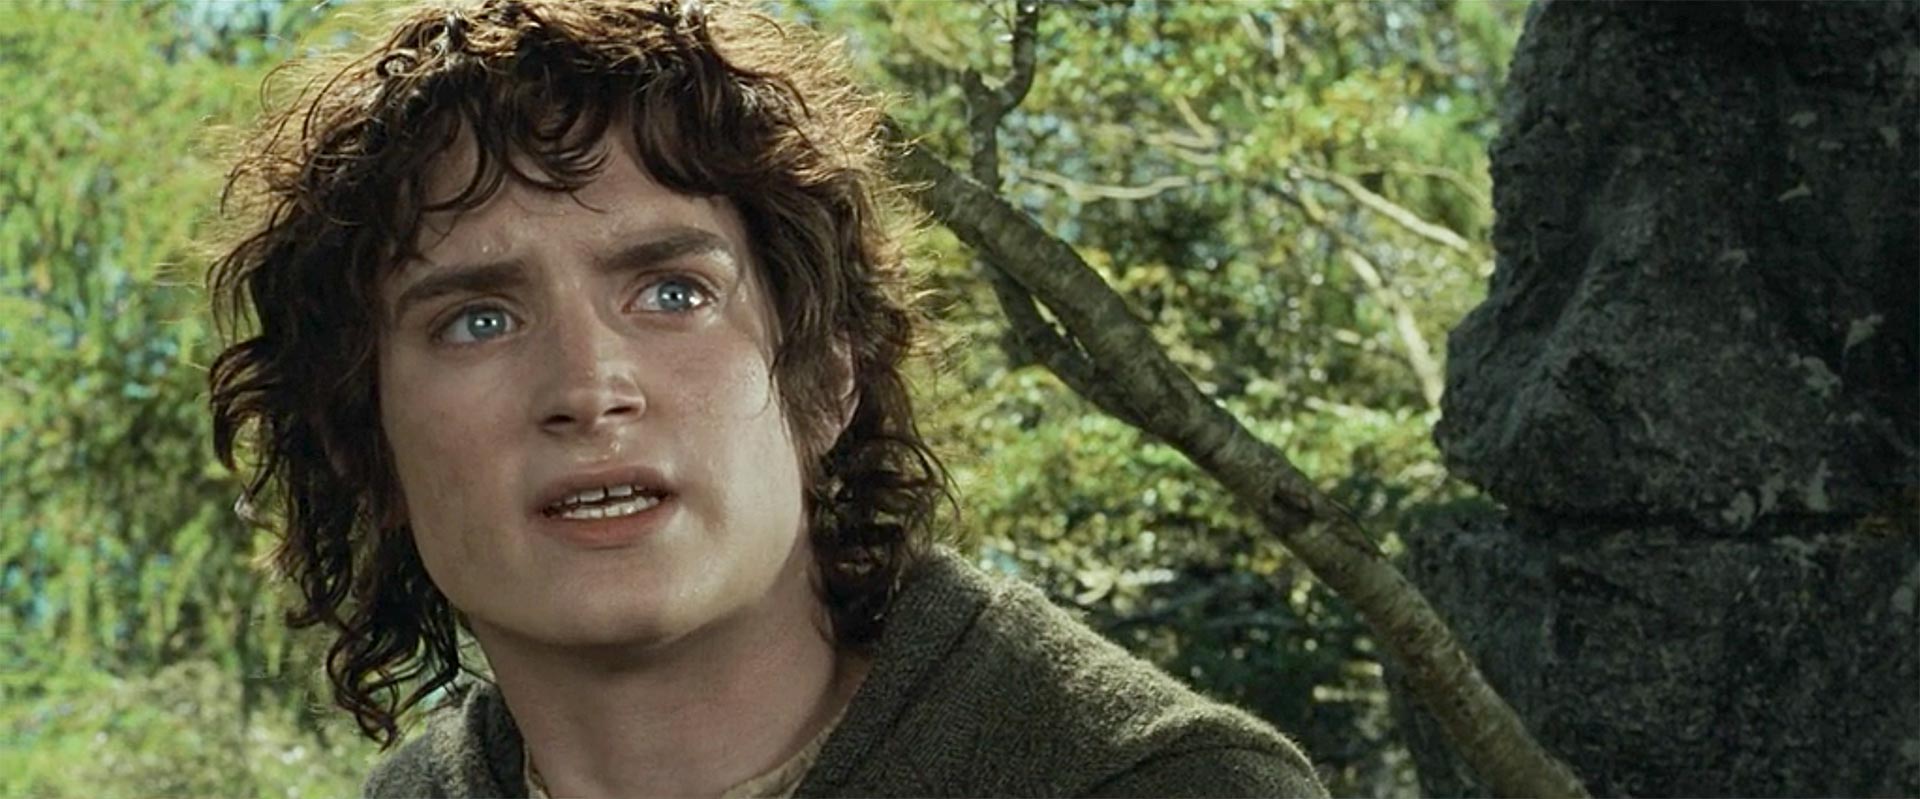 The Lord of the Rings: The Fellowship of the Ring 4k Digital Still